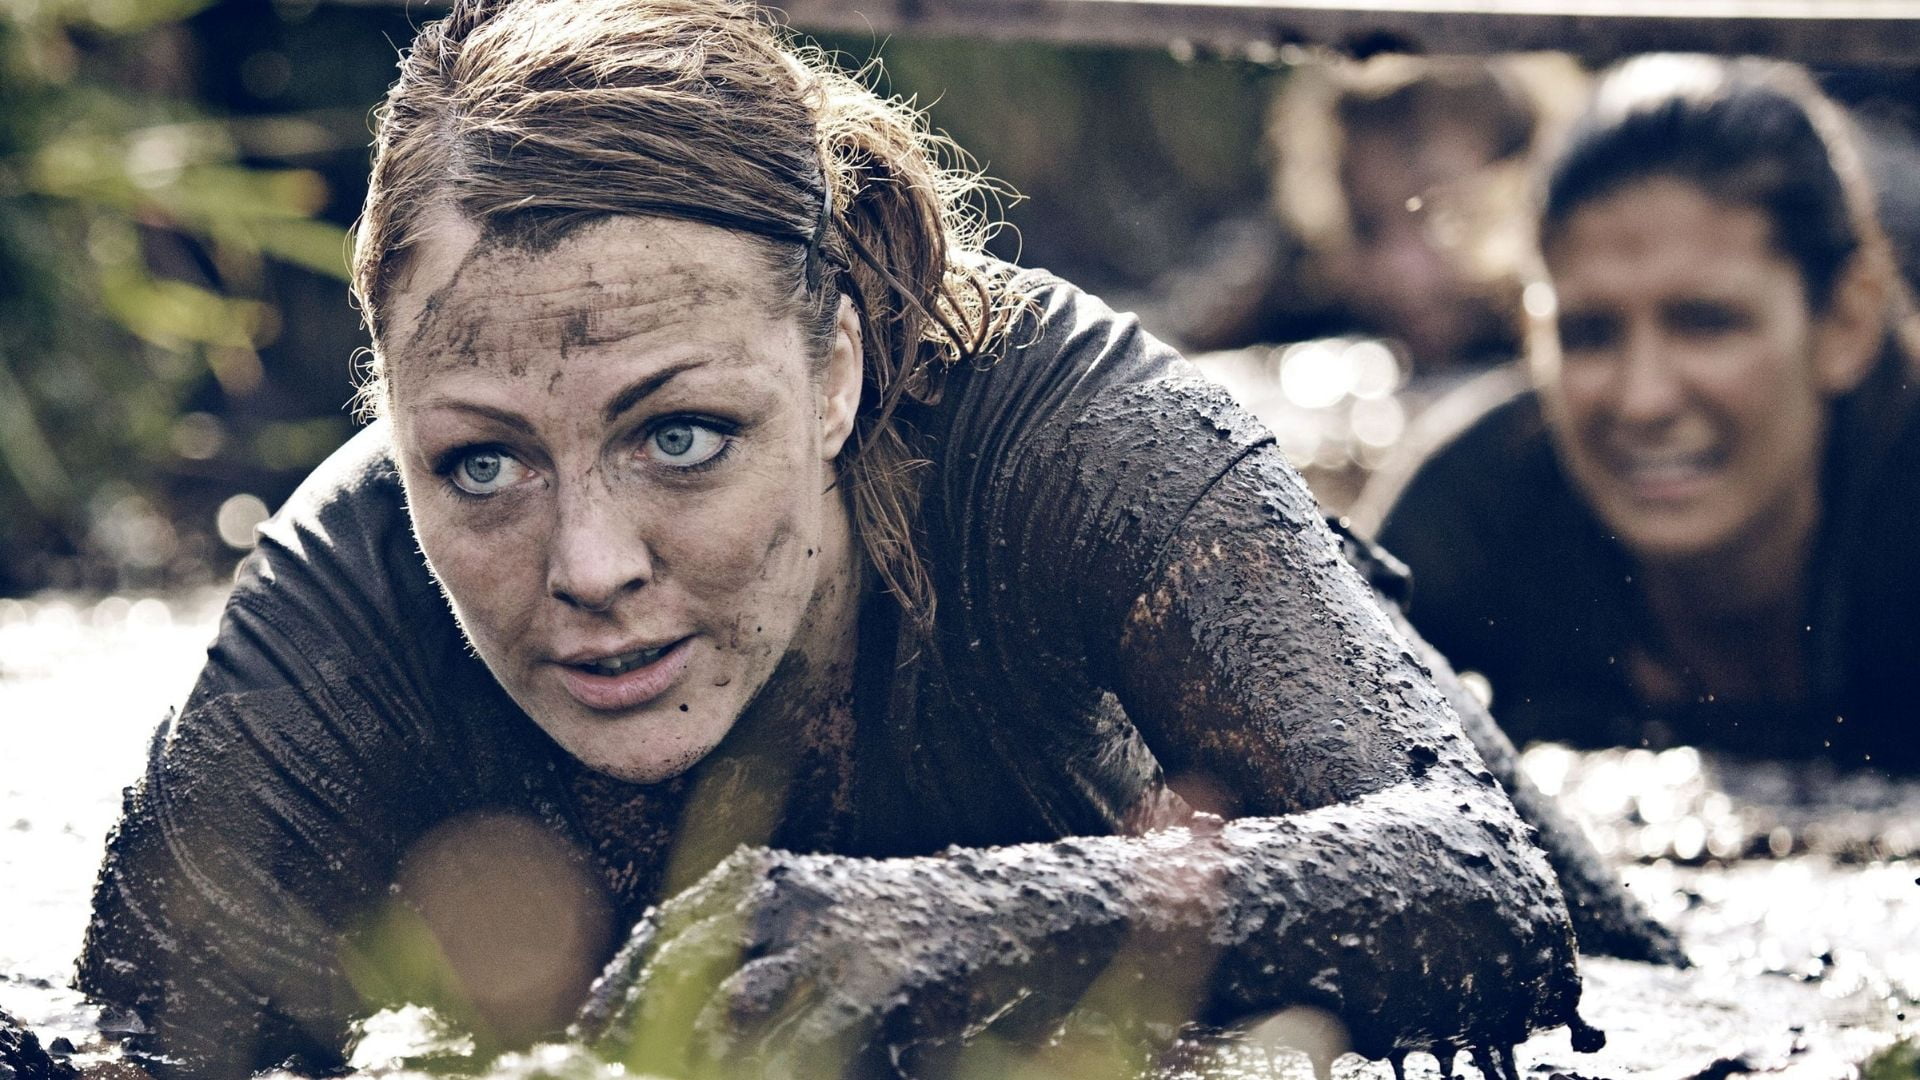 Spartan Race Diet Plan: The Guide to Fueling Performance